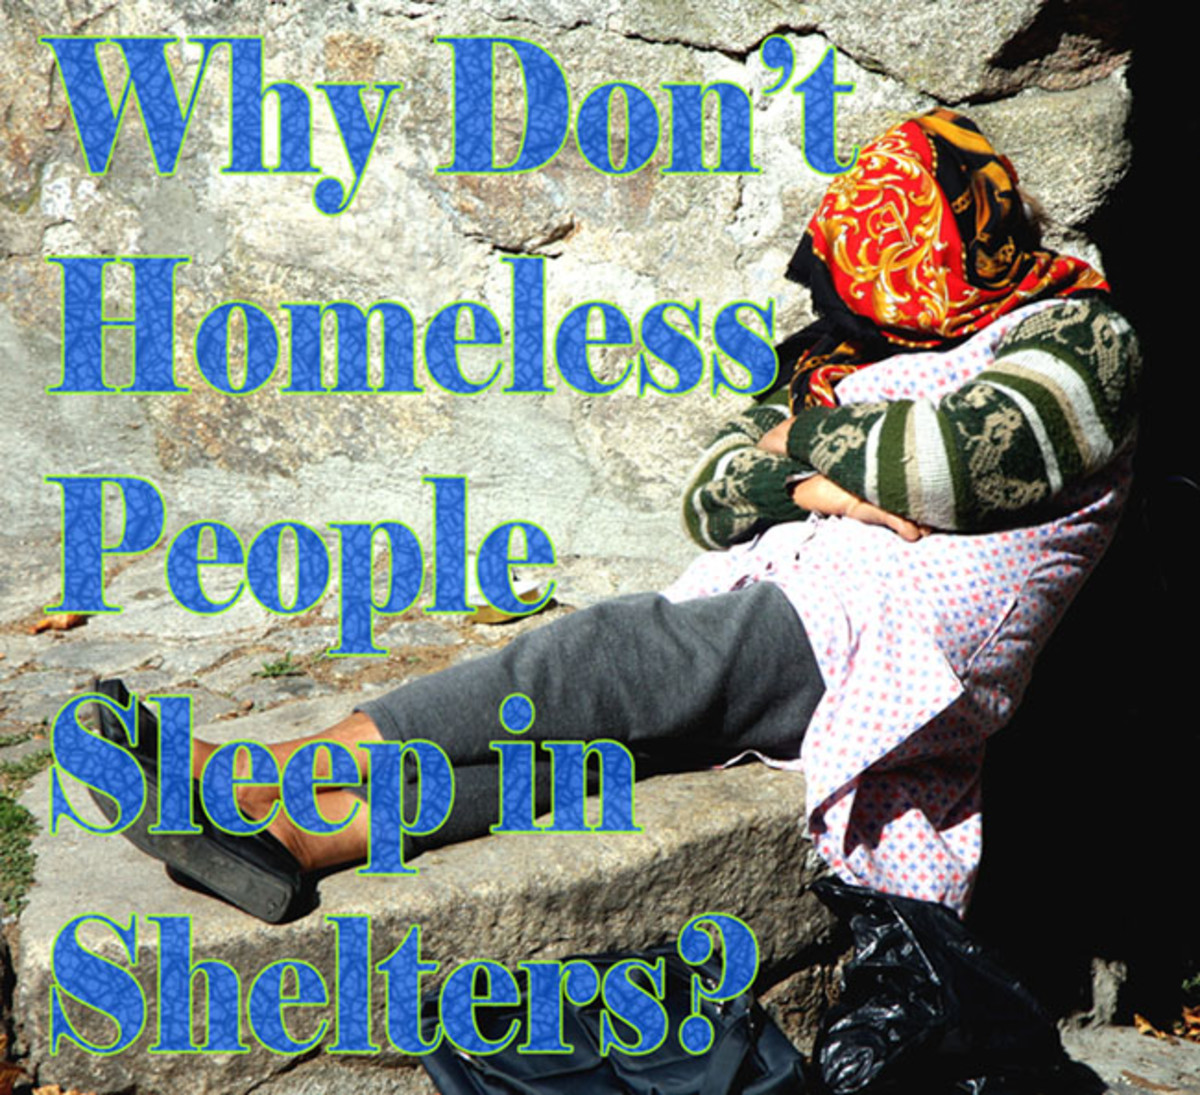 Why Don't Homeless People Use Shelters?